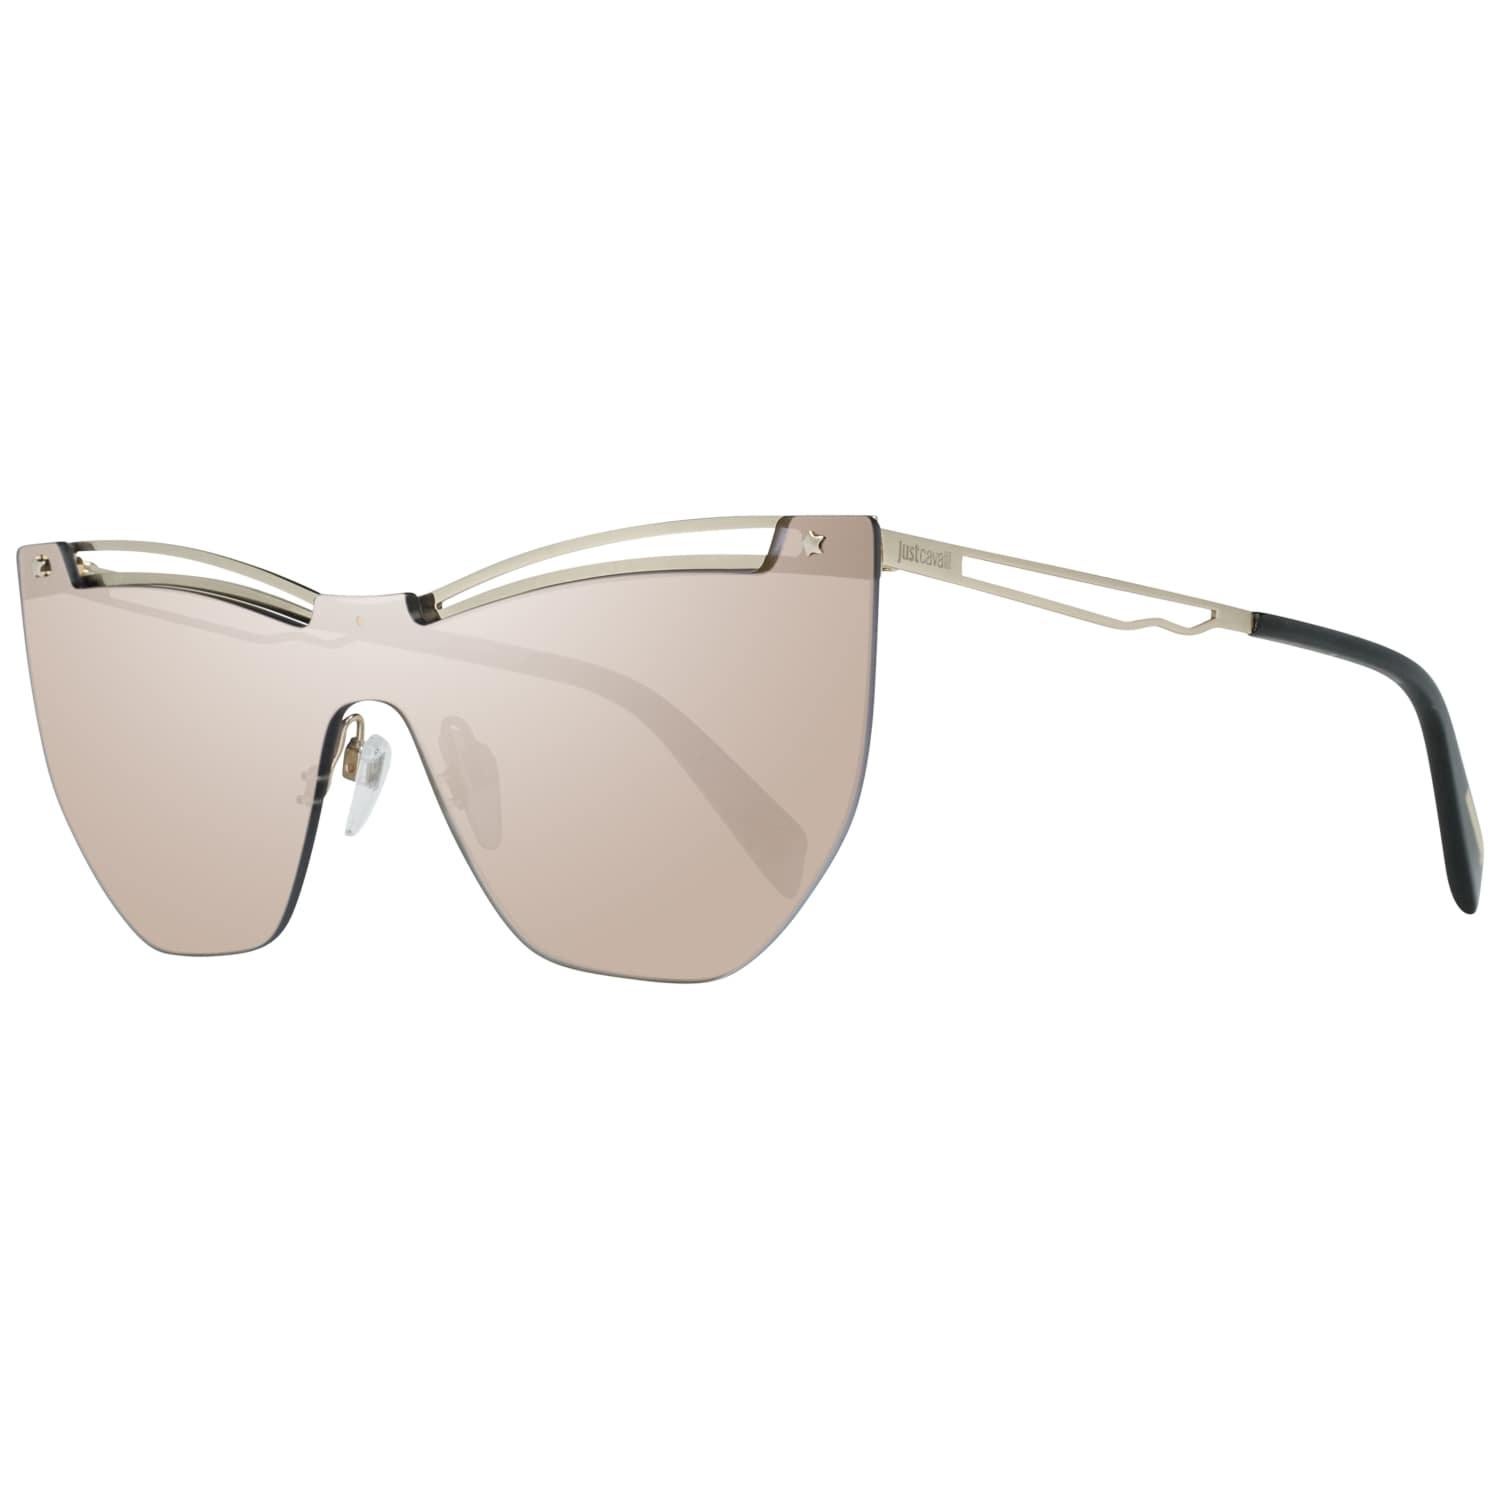 Details
MATERIAL: Metal
COLOR: Gold
MODEL: JC841S 13832C
GENDER: Women
COUNTRY OF MANUFACTURE: China
TYPE: Sunglasses
ORIGINAL CASE?: Yes
STYLE: Mono Lens
OCCASION: Casual
FEATURES: Lightweight
LENS COLOR: Grey
LENS TECHNOLOGY: Mirrored
YEAR